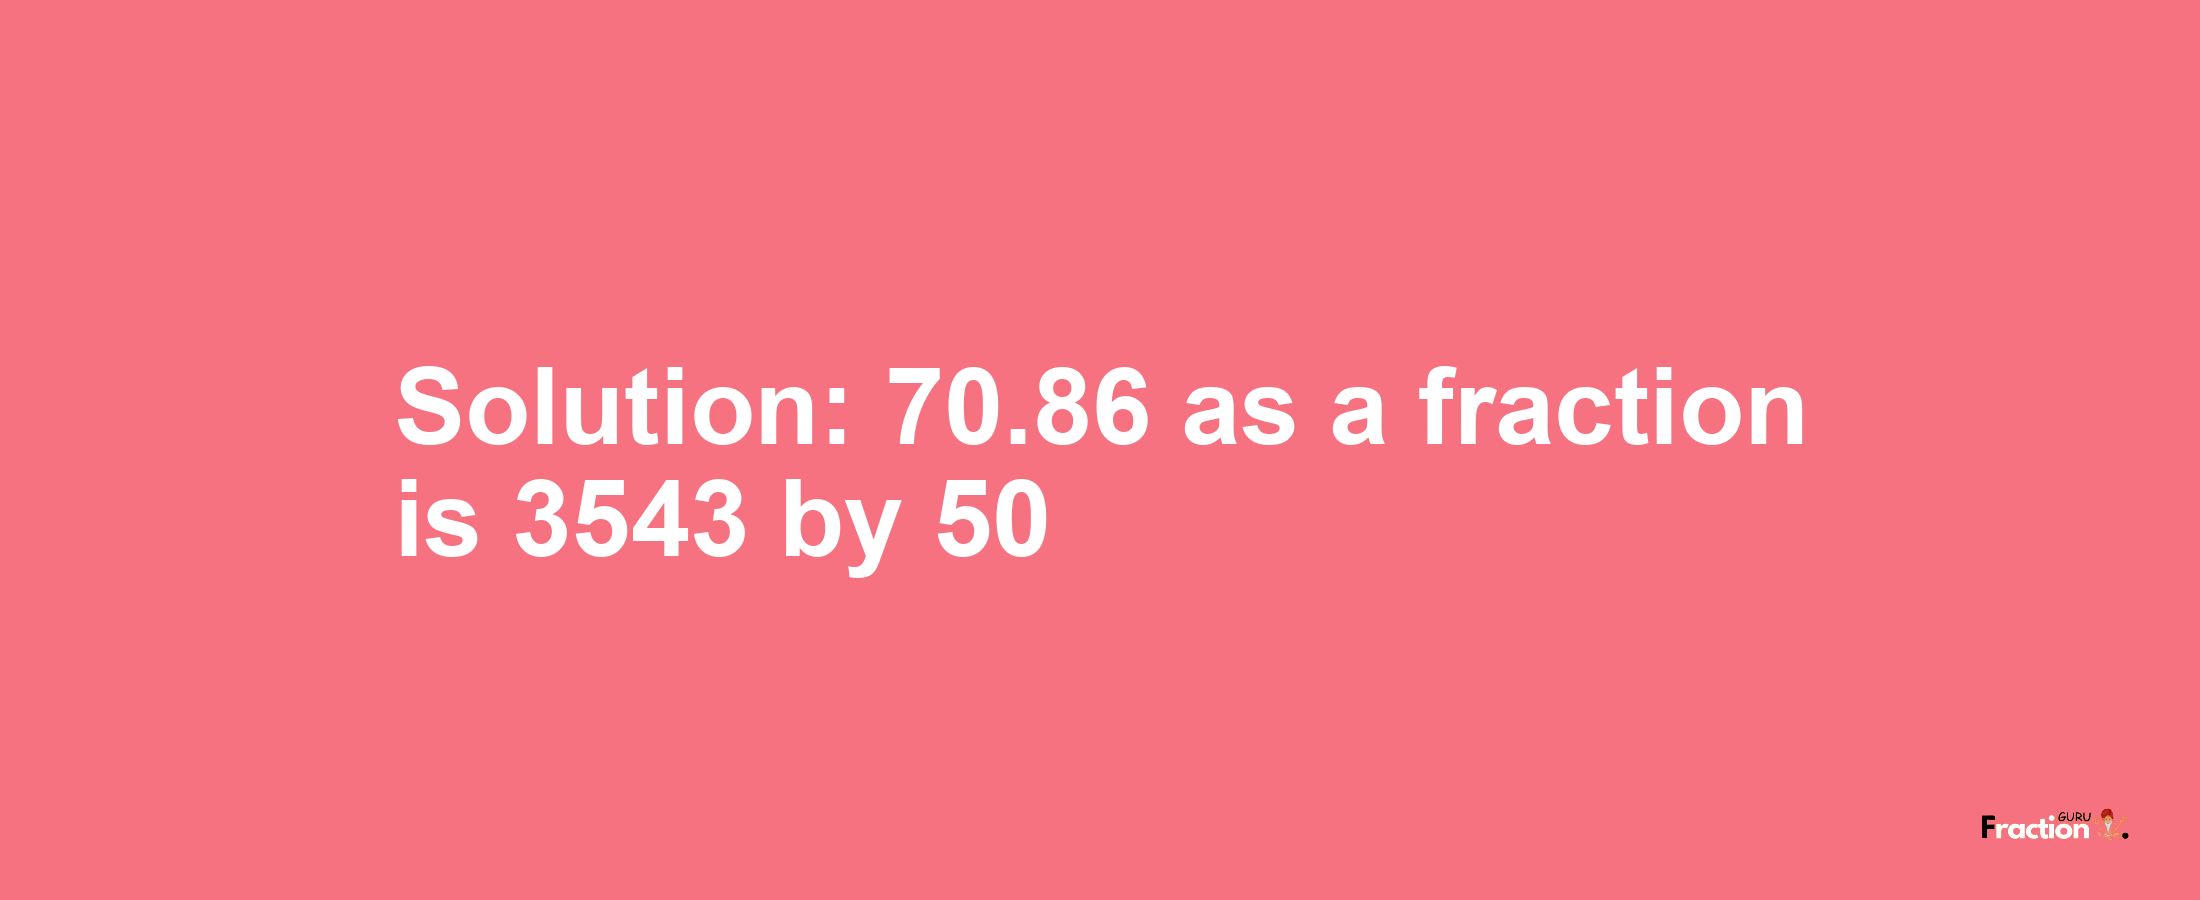 Solution:70.86 as a fraction is 3543/50